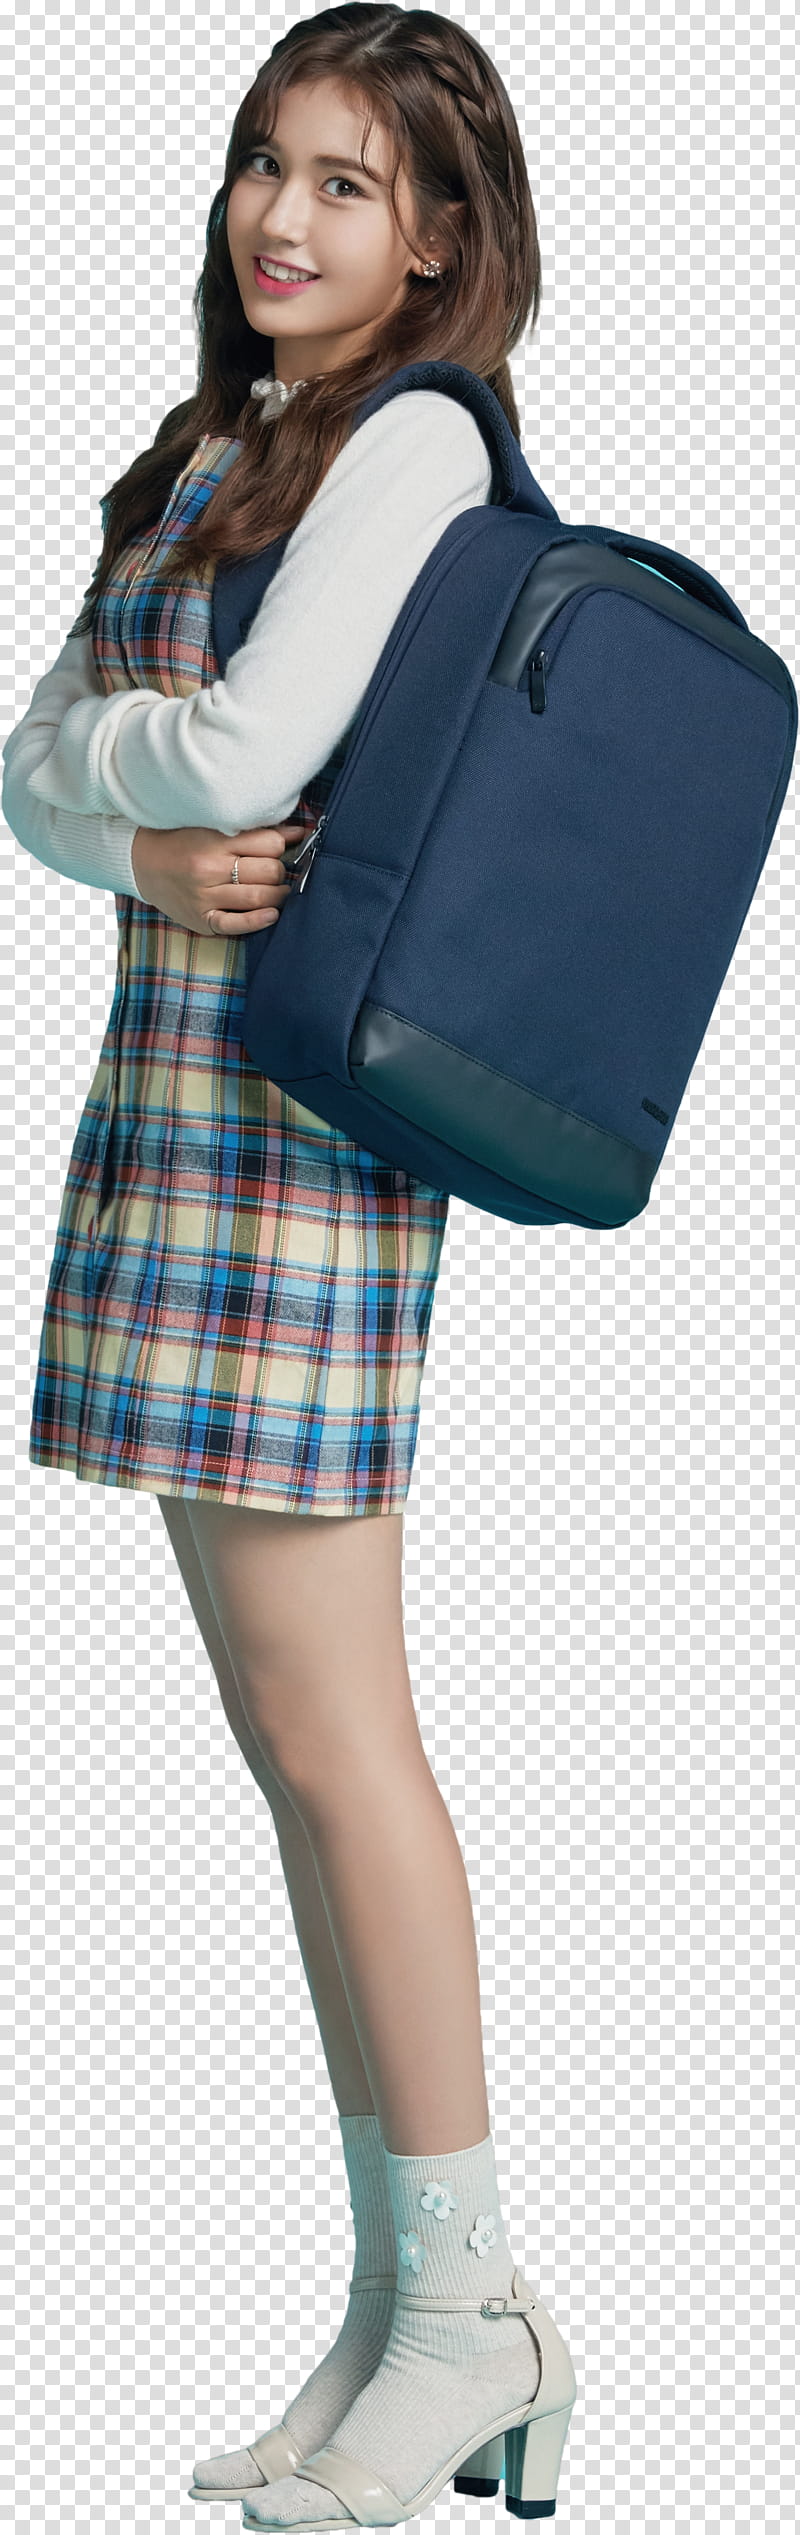 Somi, woman carrying bag transparent background PNG clipart